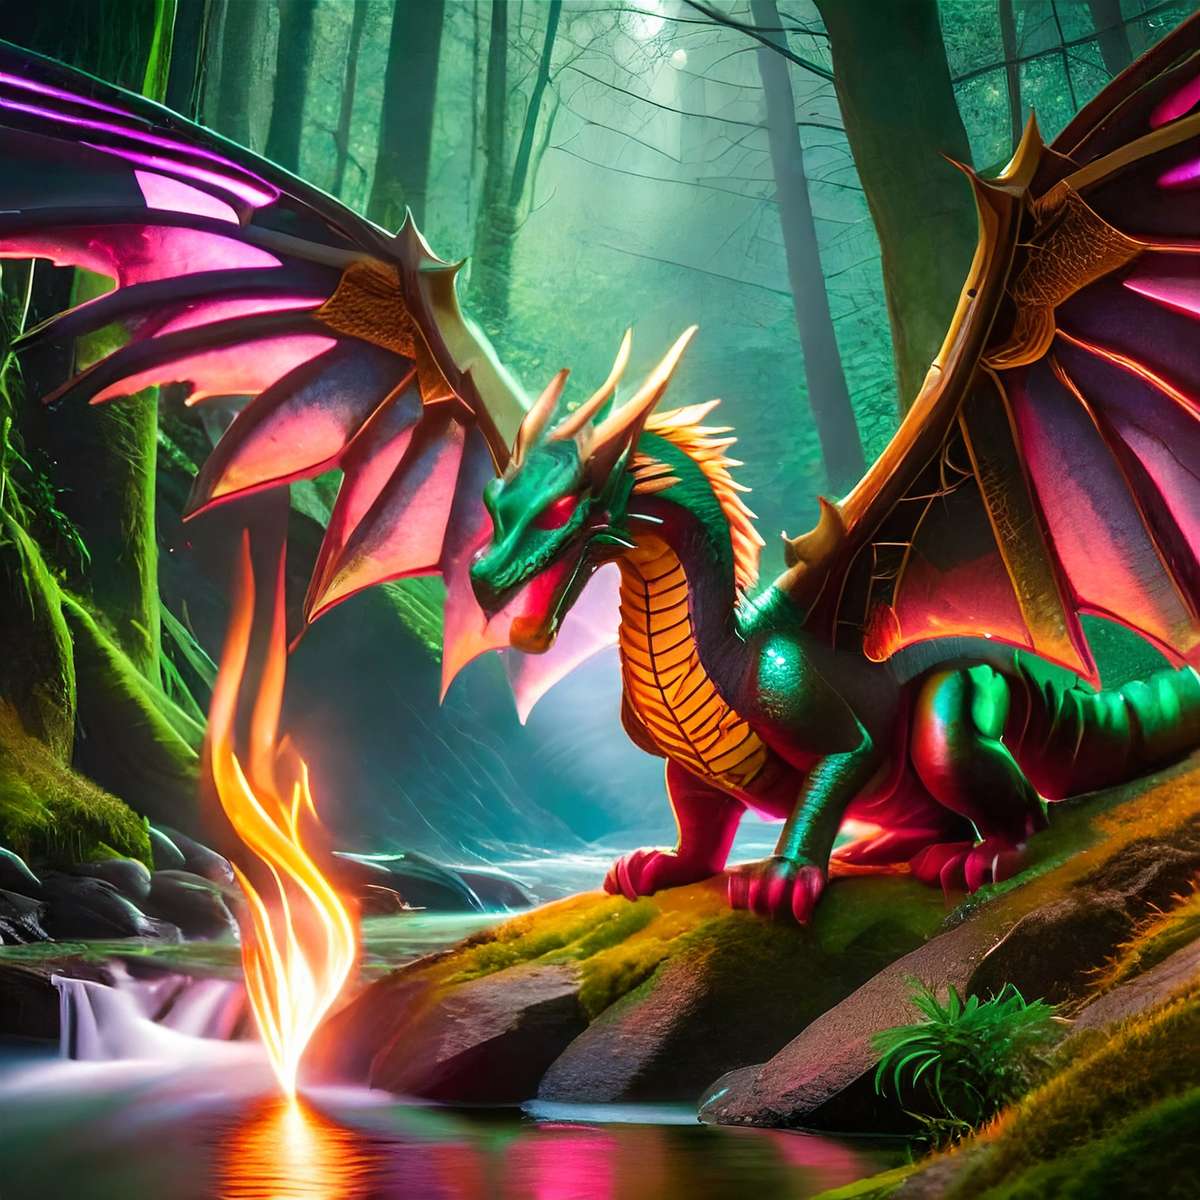 Mythical Dragon puzzle online from photo